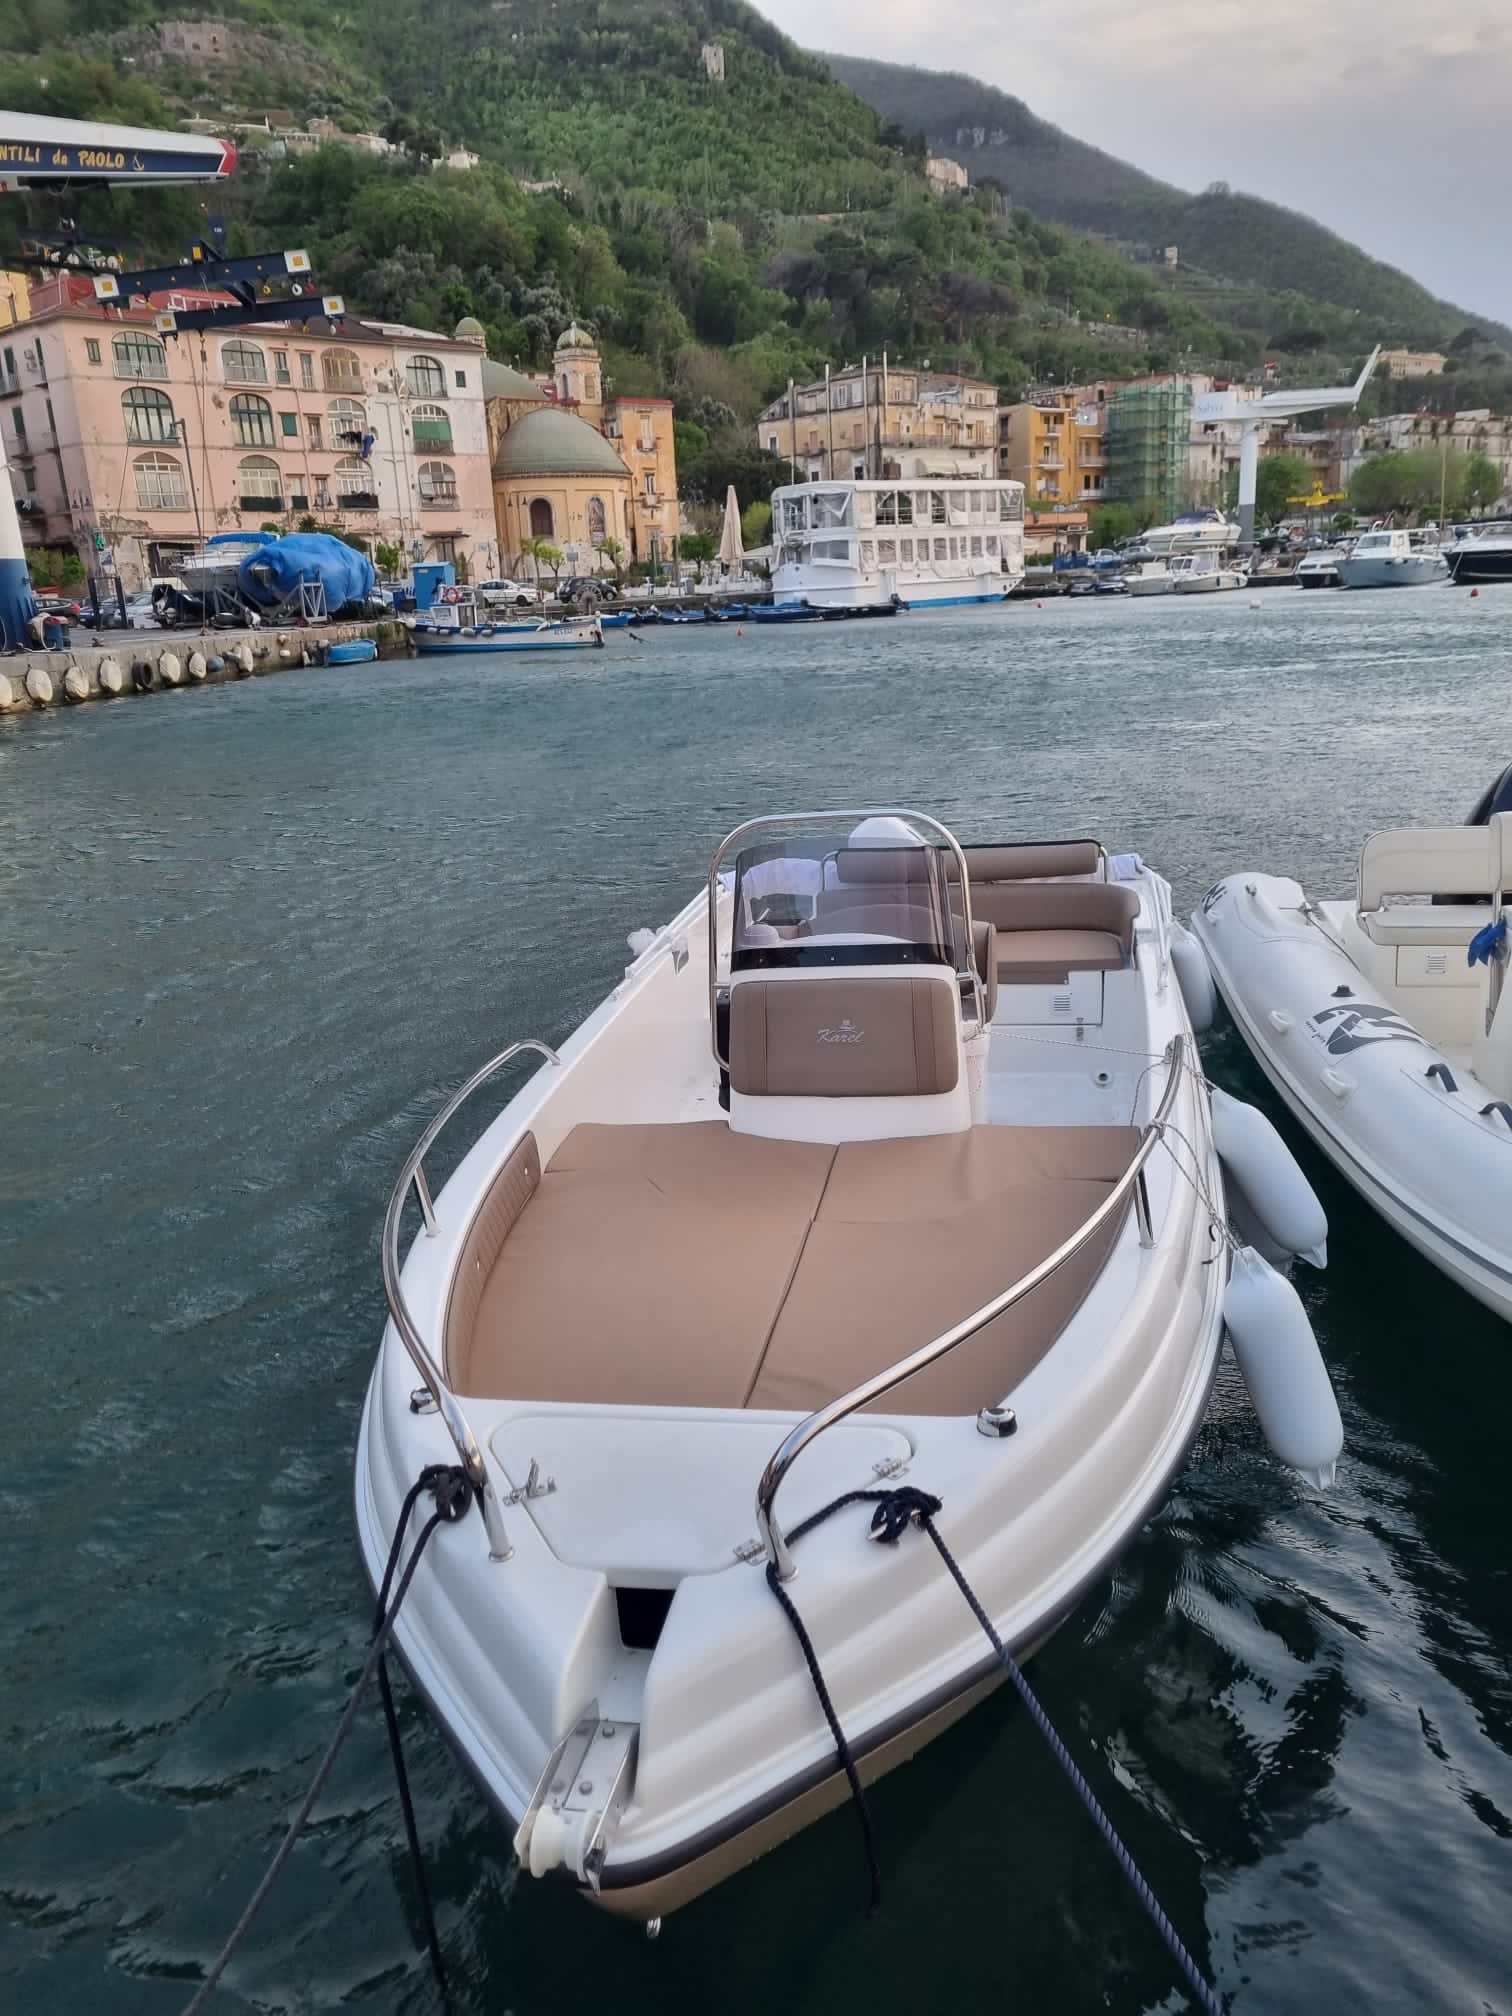 Ithaca 550 - Yacht Charter Naples & Boat hire in Italy Campania Bay of Naples Castellammare di Stabia Porto di Castellammare di Stabia 4